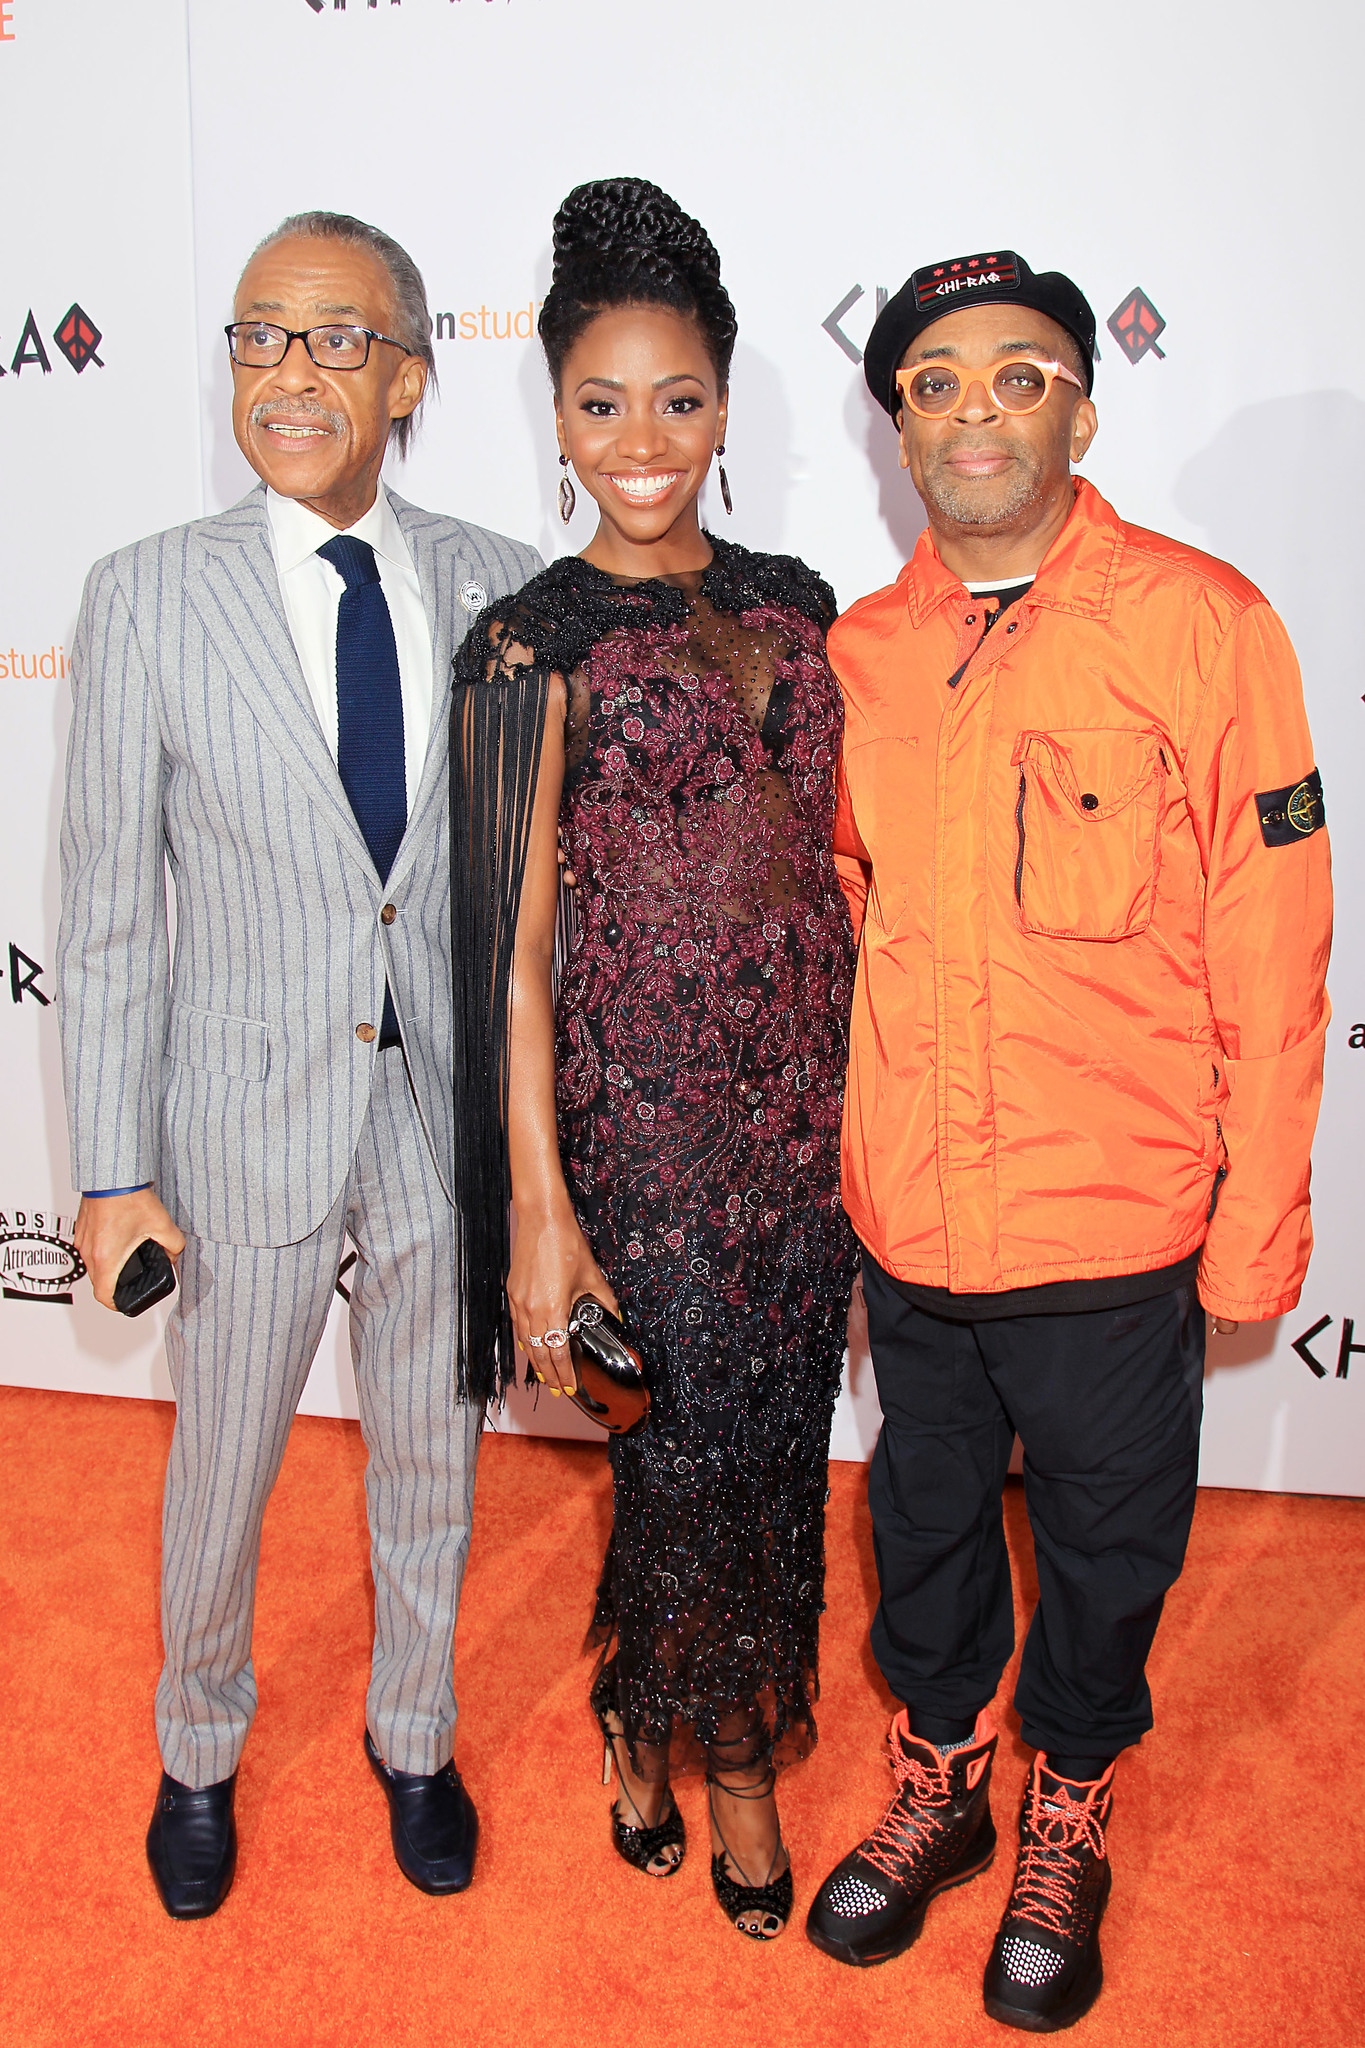 Spike Lee, Al Sharpton and Teyonah Parris at event of Chi-Raq (2015)